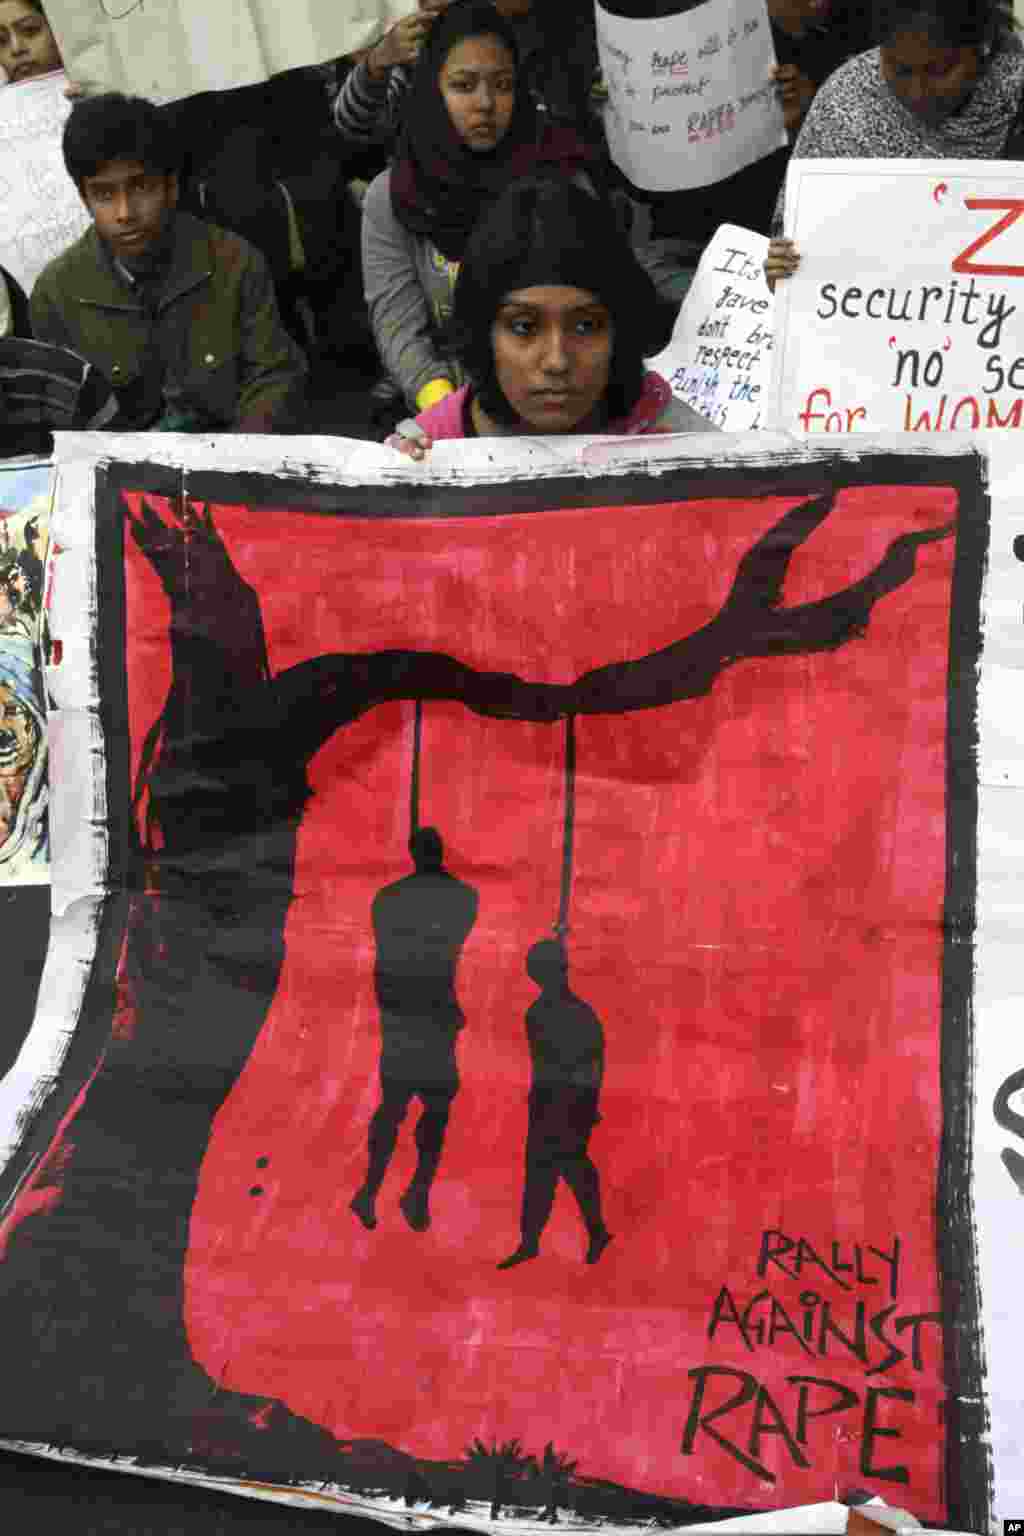 Indians protesting the recent gang-rape of a young woman in a moving bus in New Delhi, display a poster calling for death penalty for offenders at a rally in Kolkata, December 27, 2012.